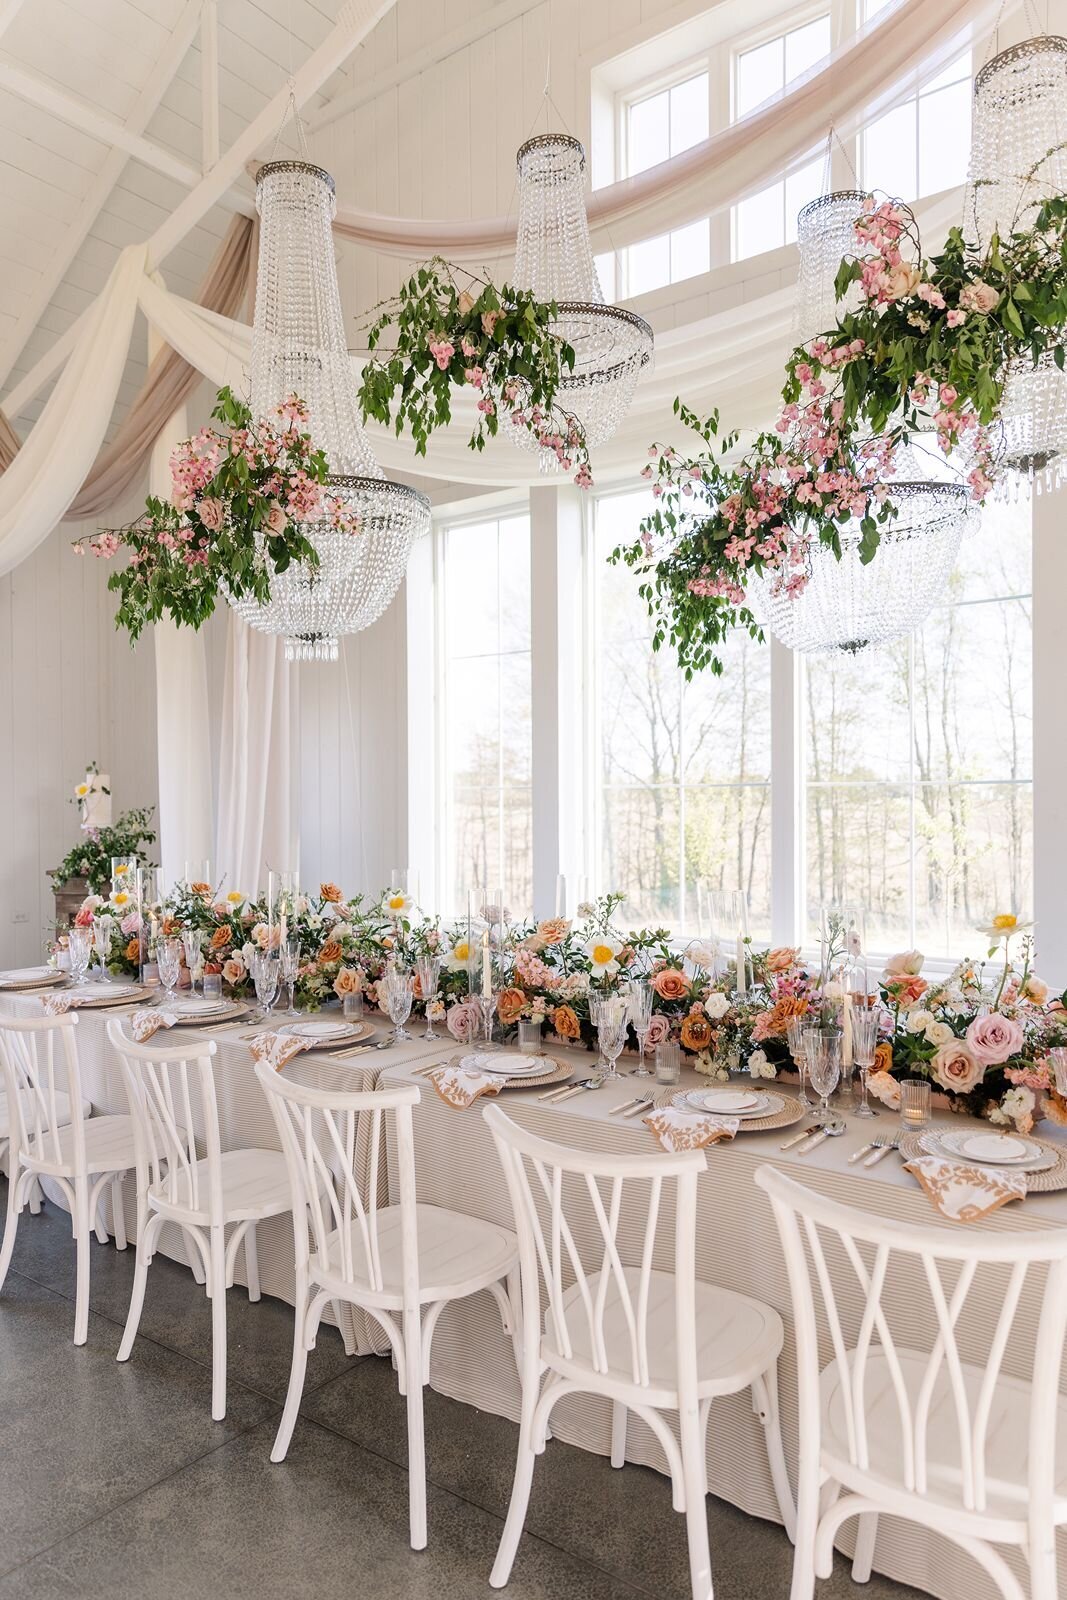 Spring Reception Decor with Hanging Chandeliers